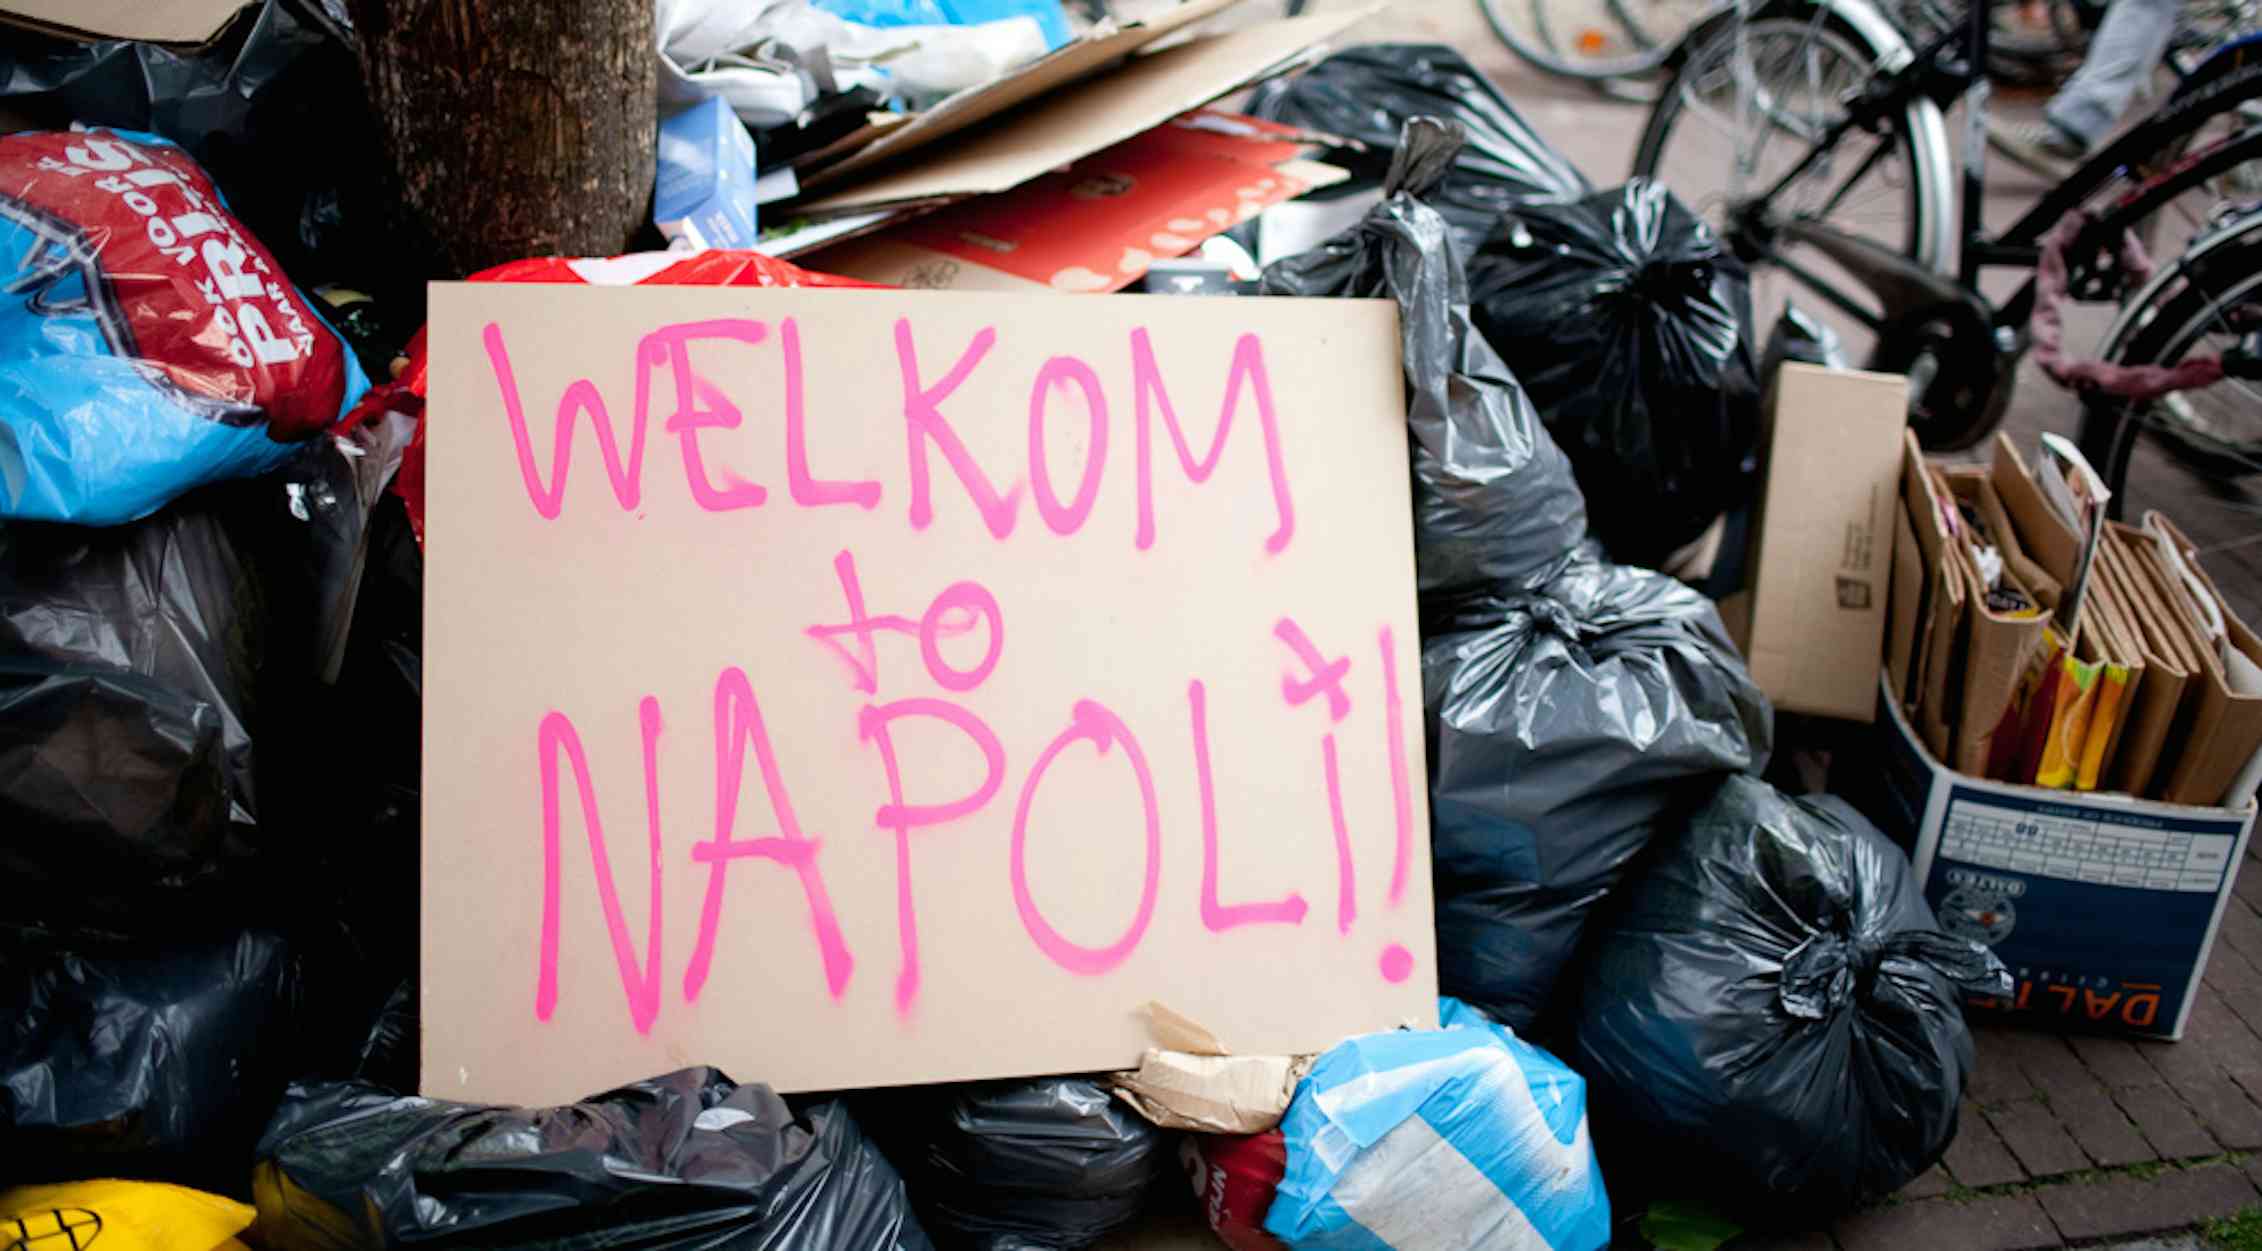 Why are some European cities better than others at dealing with garbage?